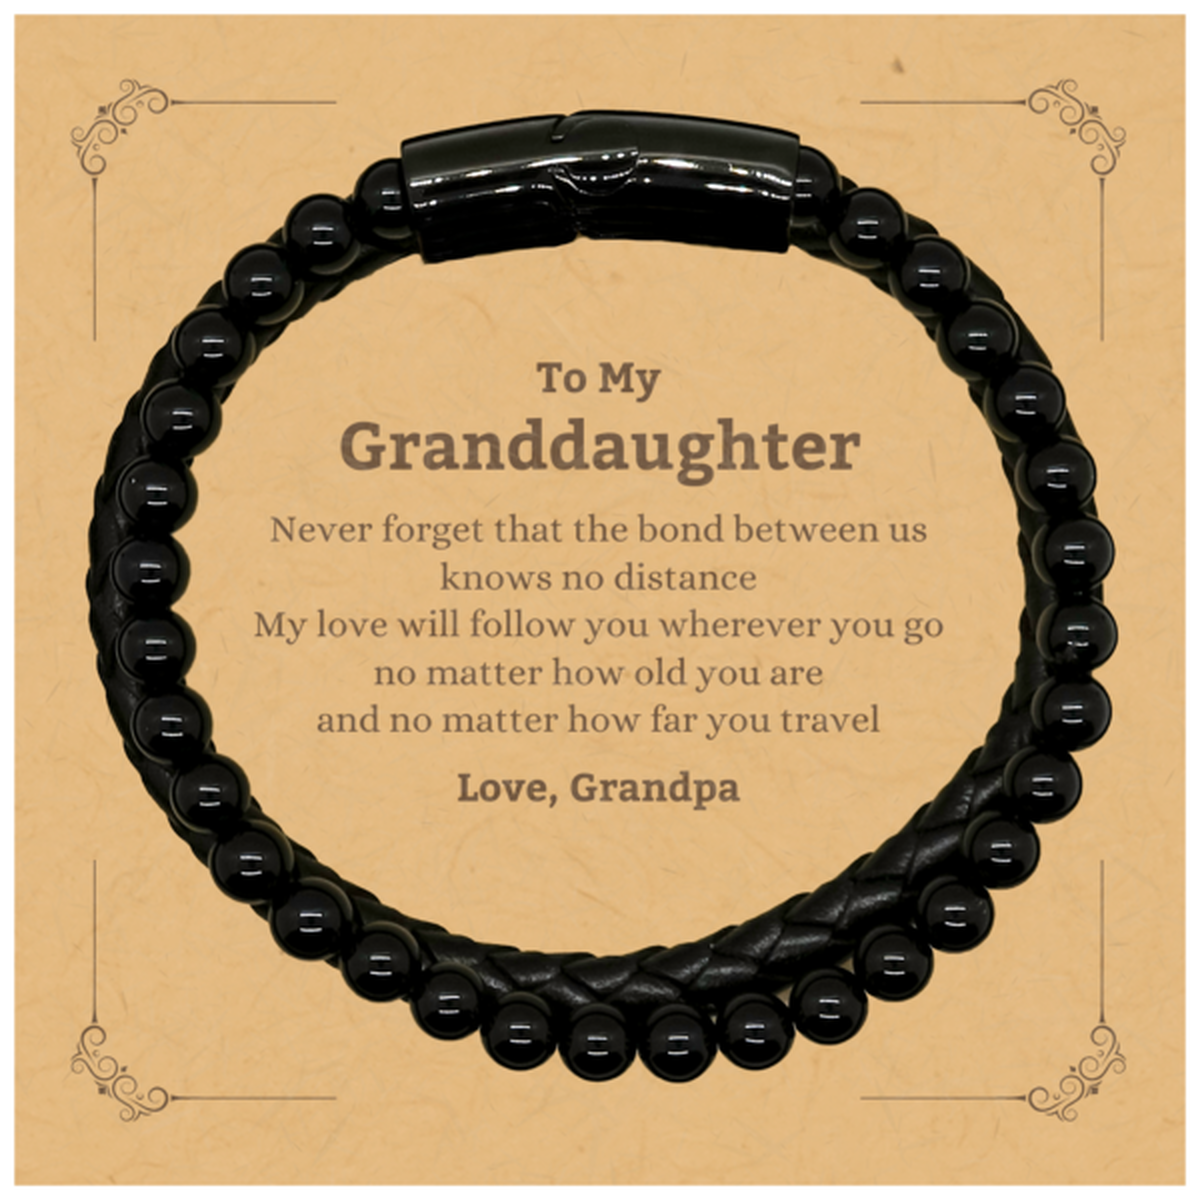 Granddaughter Birthday Gifts from Grandpa, Adjustable Stone Leather Bracelets for Granddaughter Christmas Graduation Unique Gifts Granddaughter Never forget that the bond between us knows no distance. Love, Grandpa